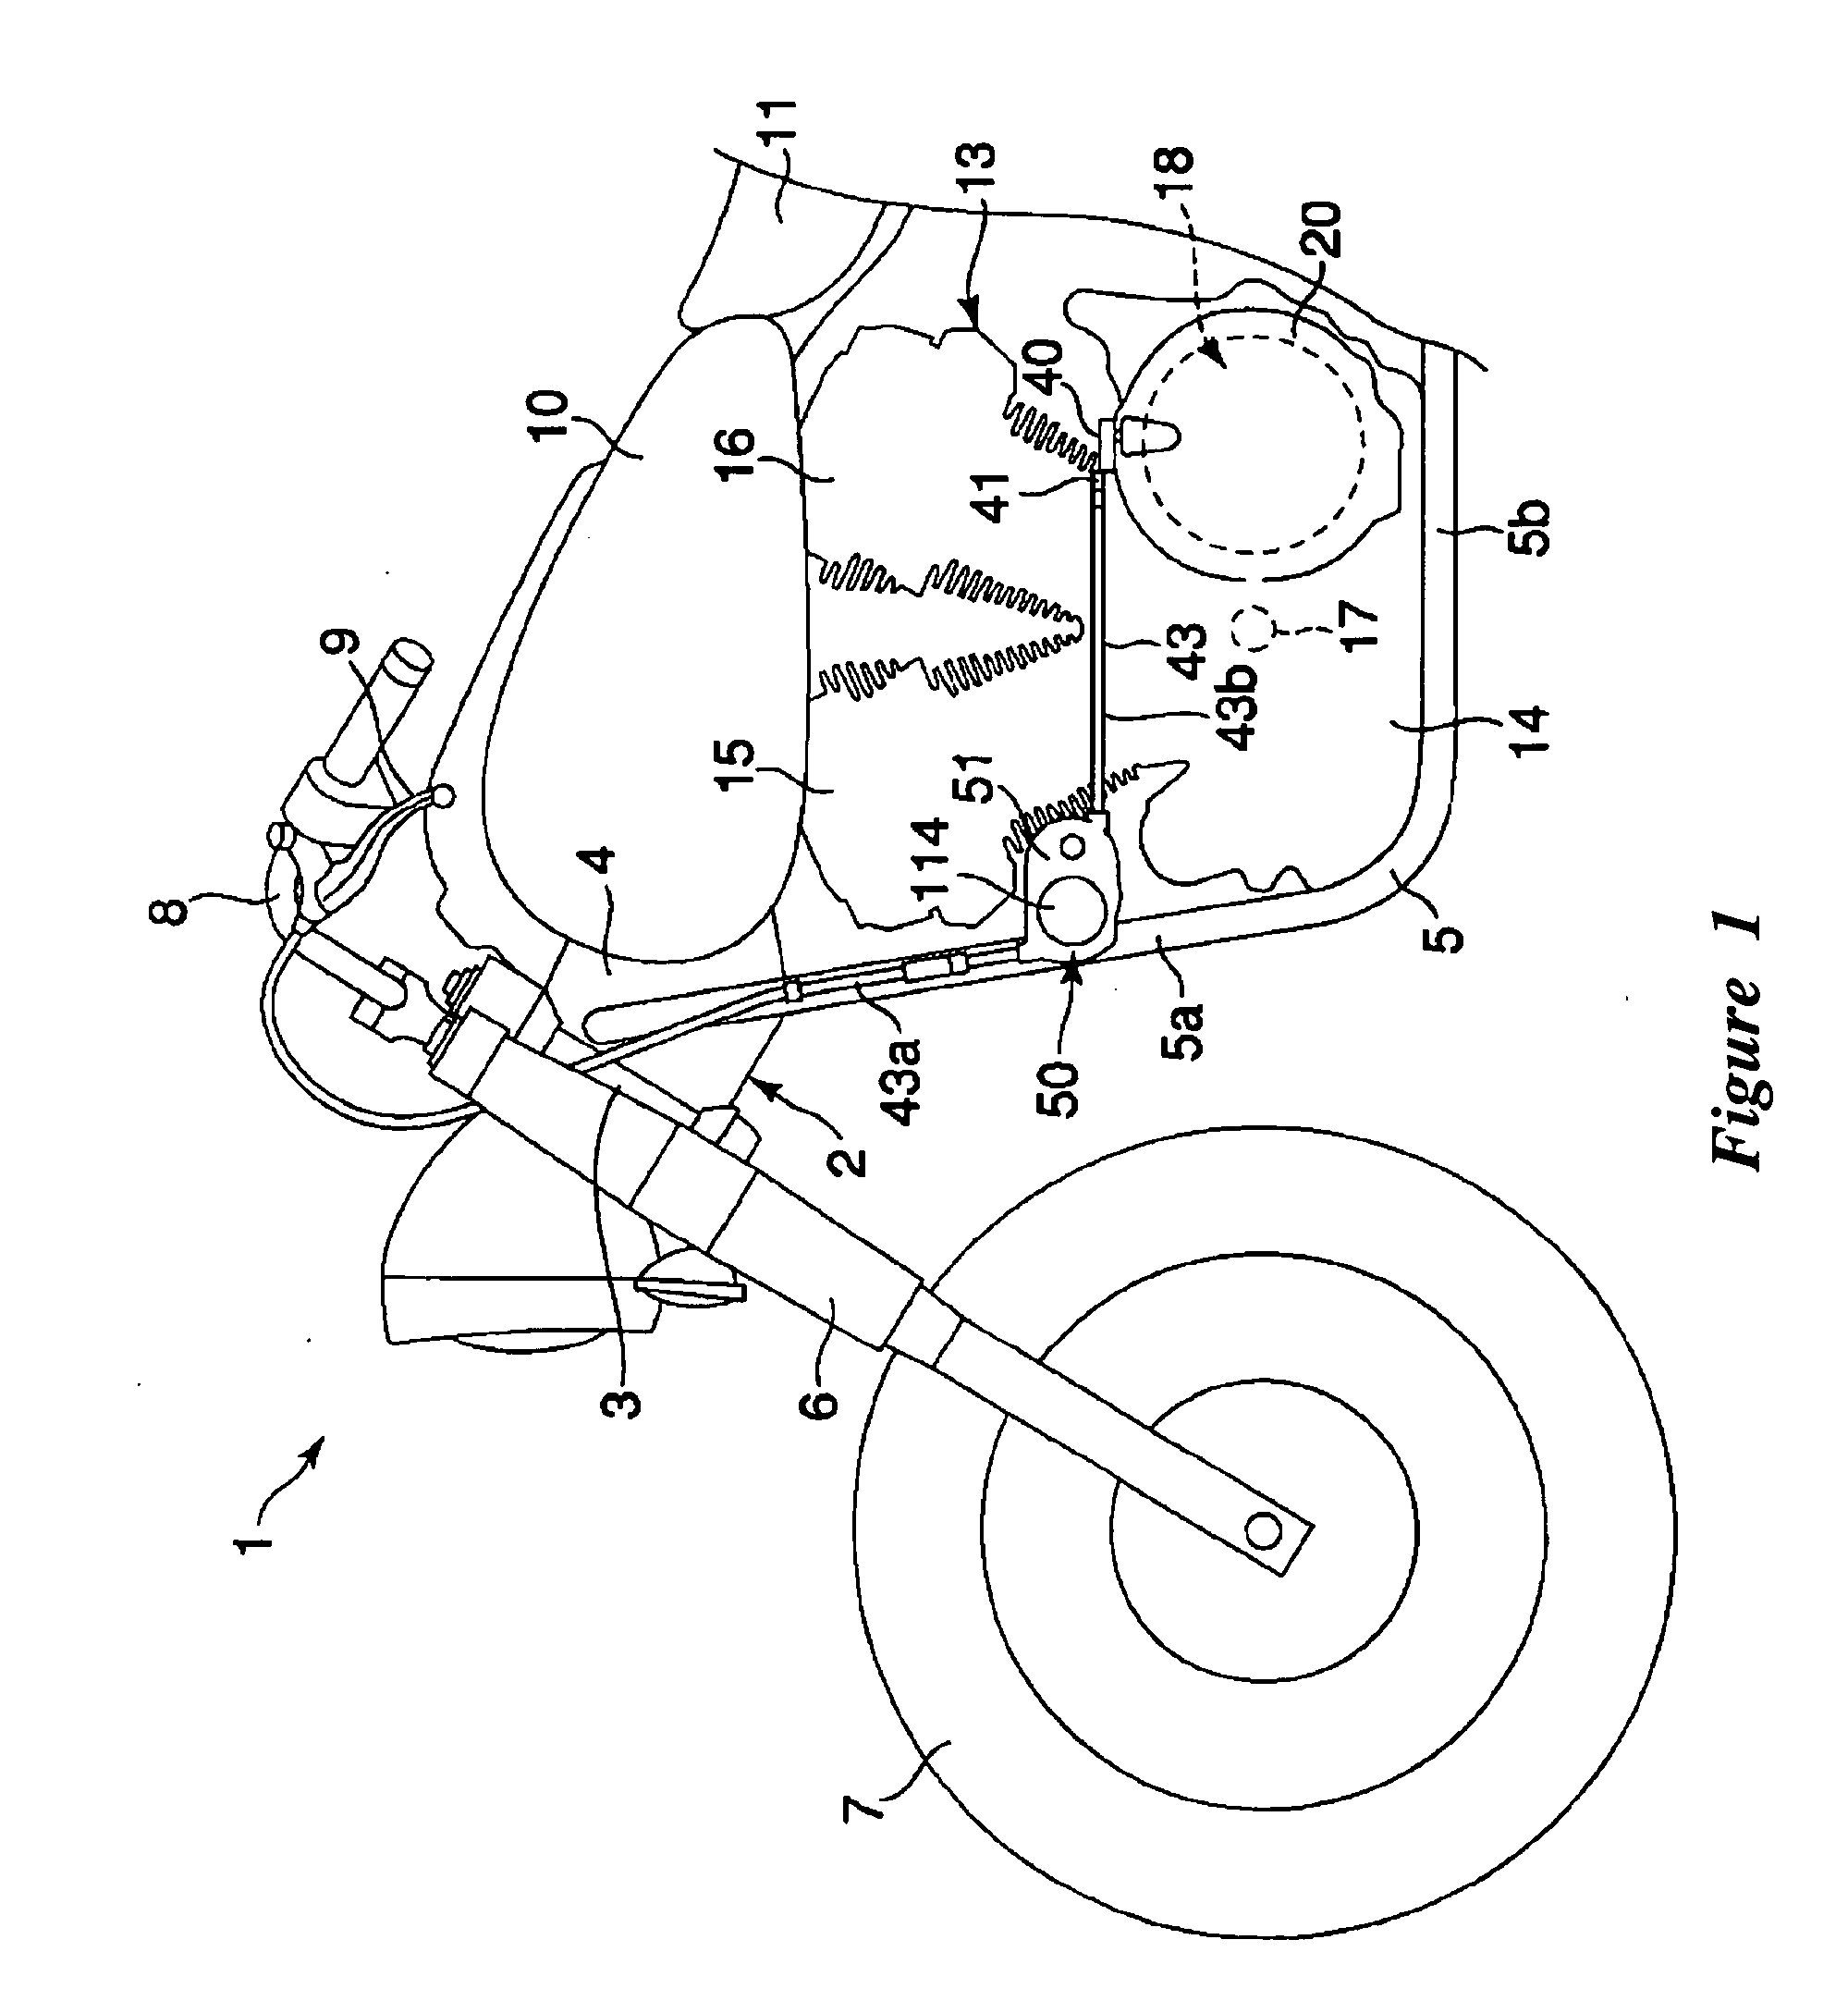 Vehicle with clutch assist device